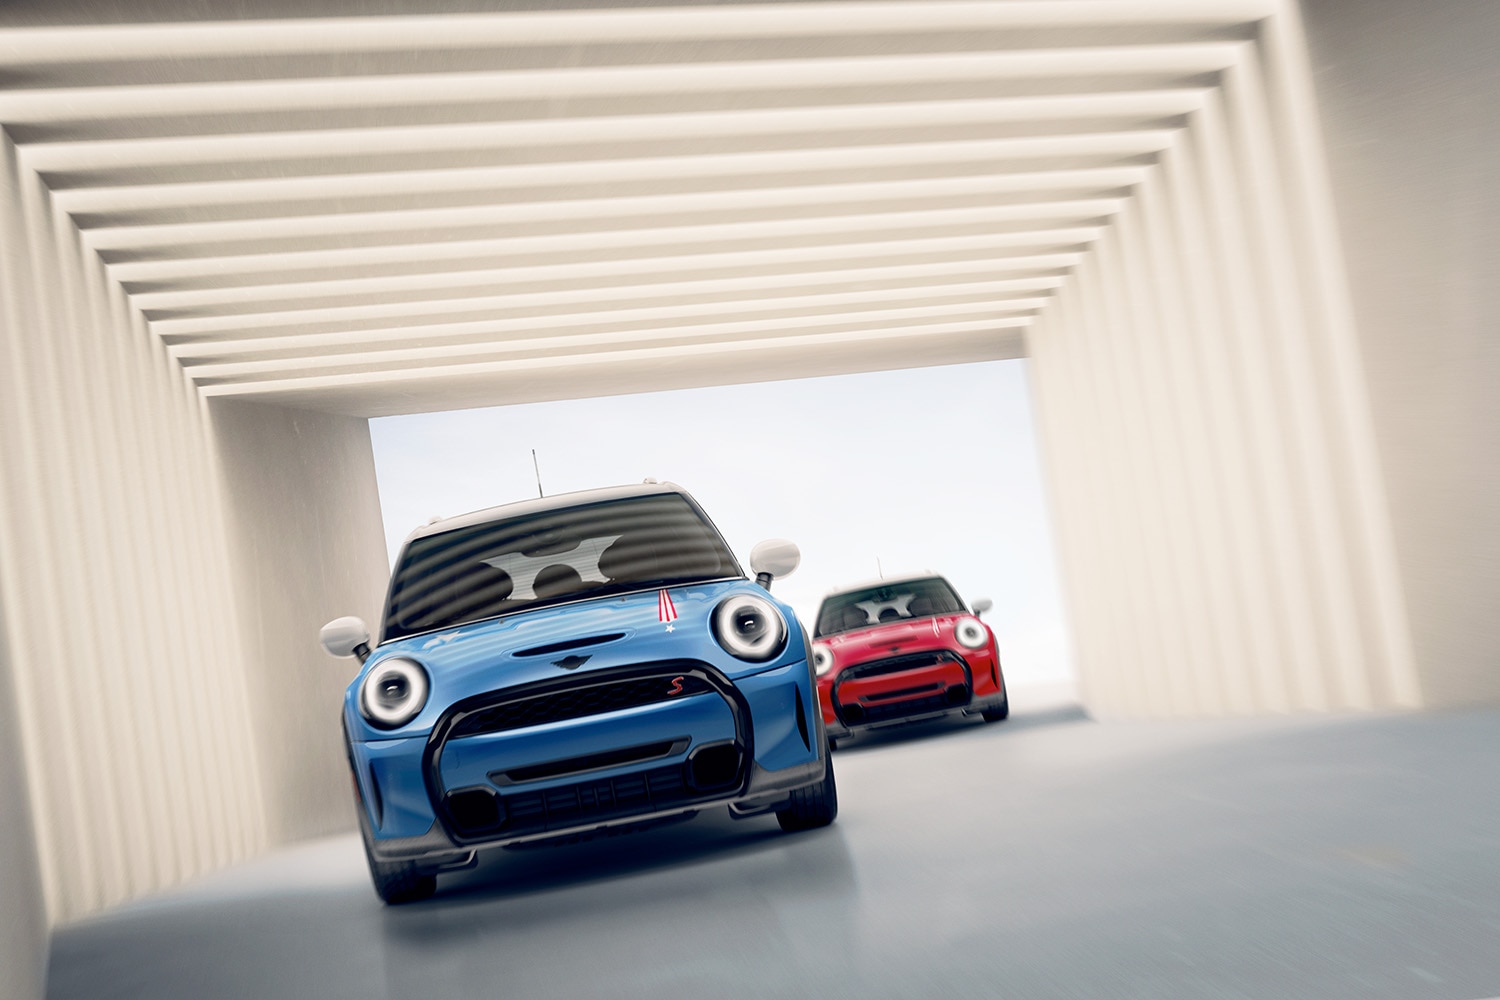 2023 Mini Cooper S Hardtop in Island Blue being chased by a red Mini Cooper